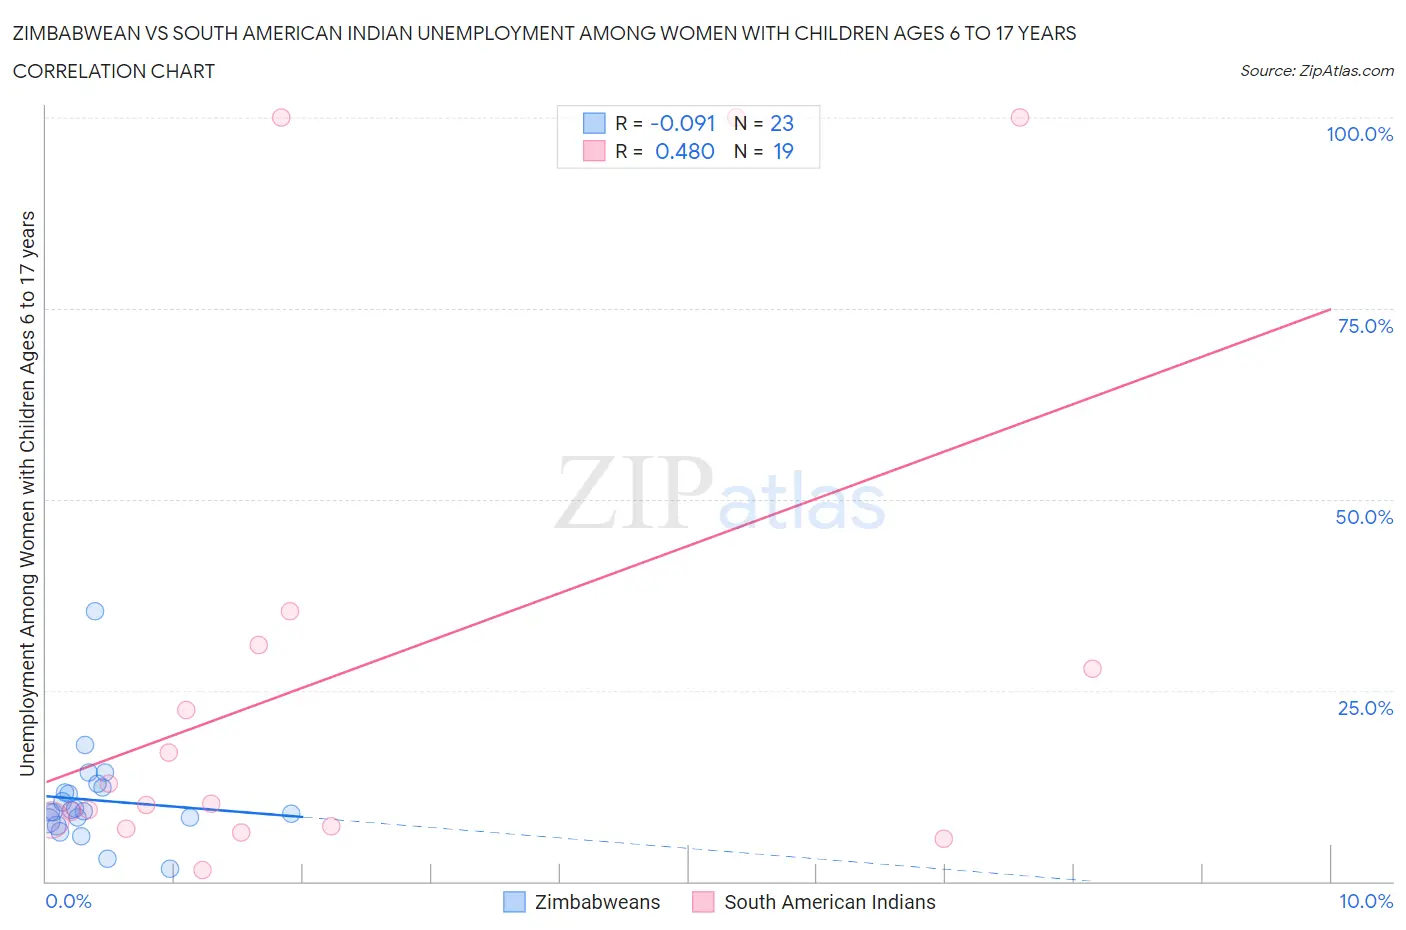 Zimbabwean vs South American Indian Unemployment Among Women with Children Ages 6 to 17 years